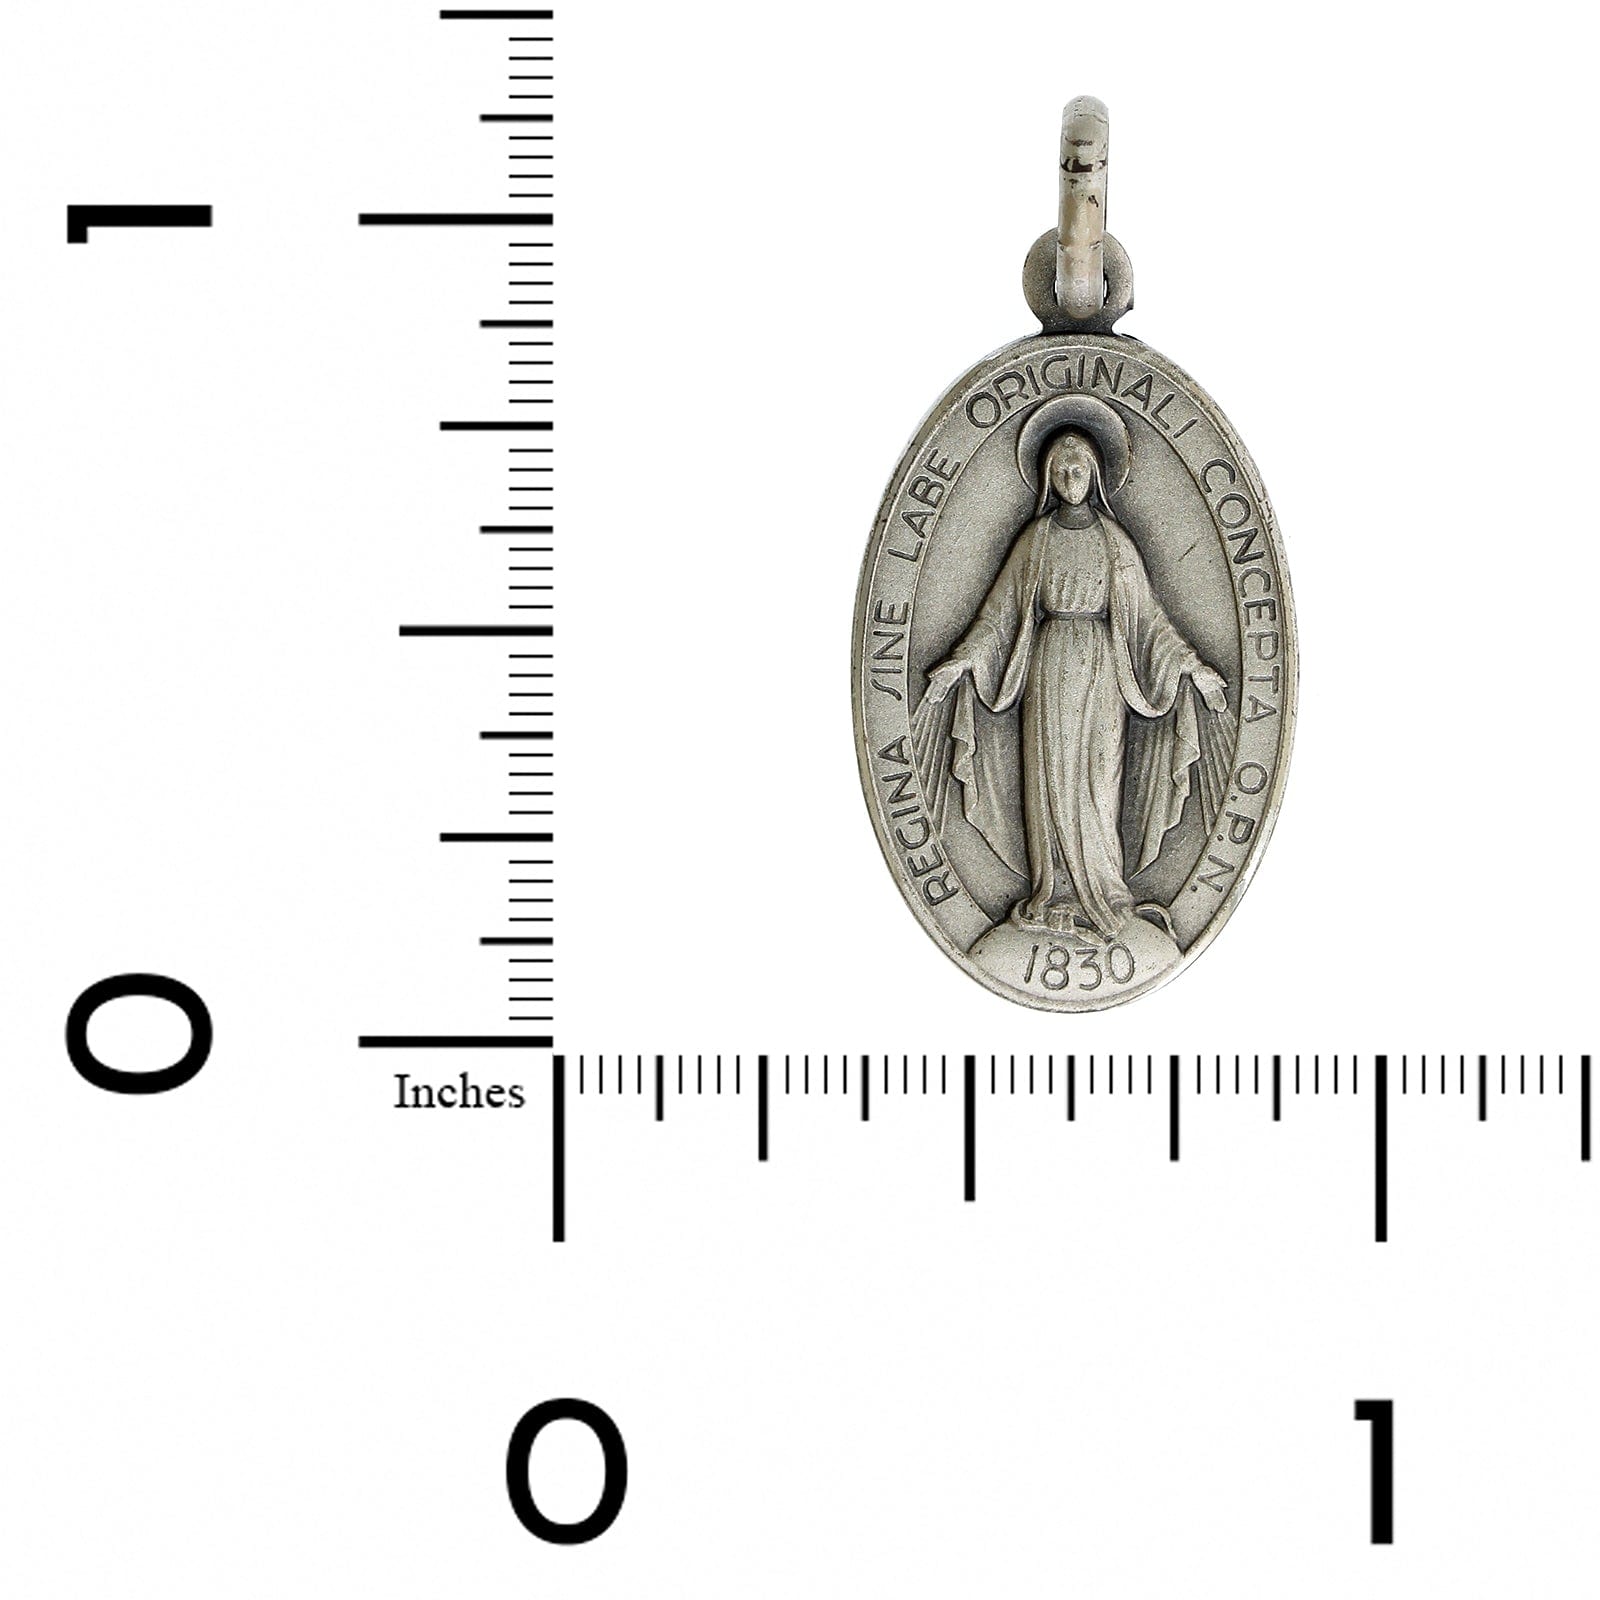 Sterling Silver Miraculous Charm